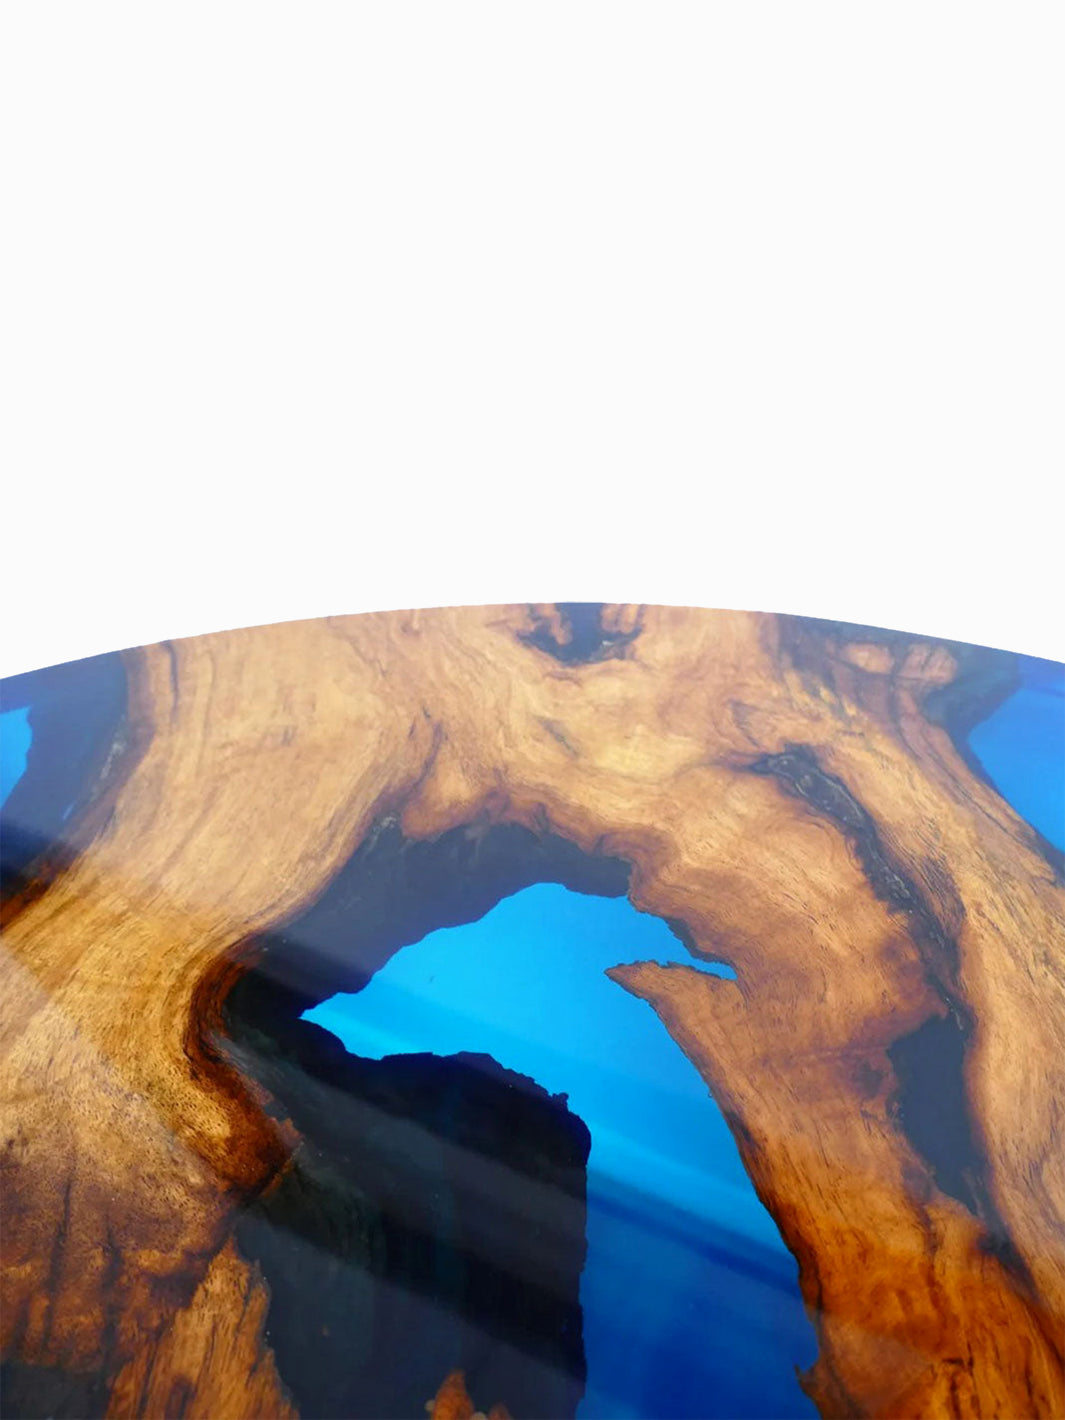 Luxurious Circular Handcrafted River Beach Epoxy Resin Wooden Dining Table | 80cm Made 4 Decor Tables MDR0017-1